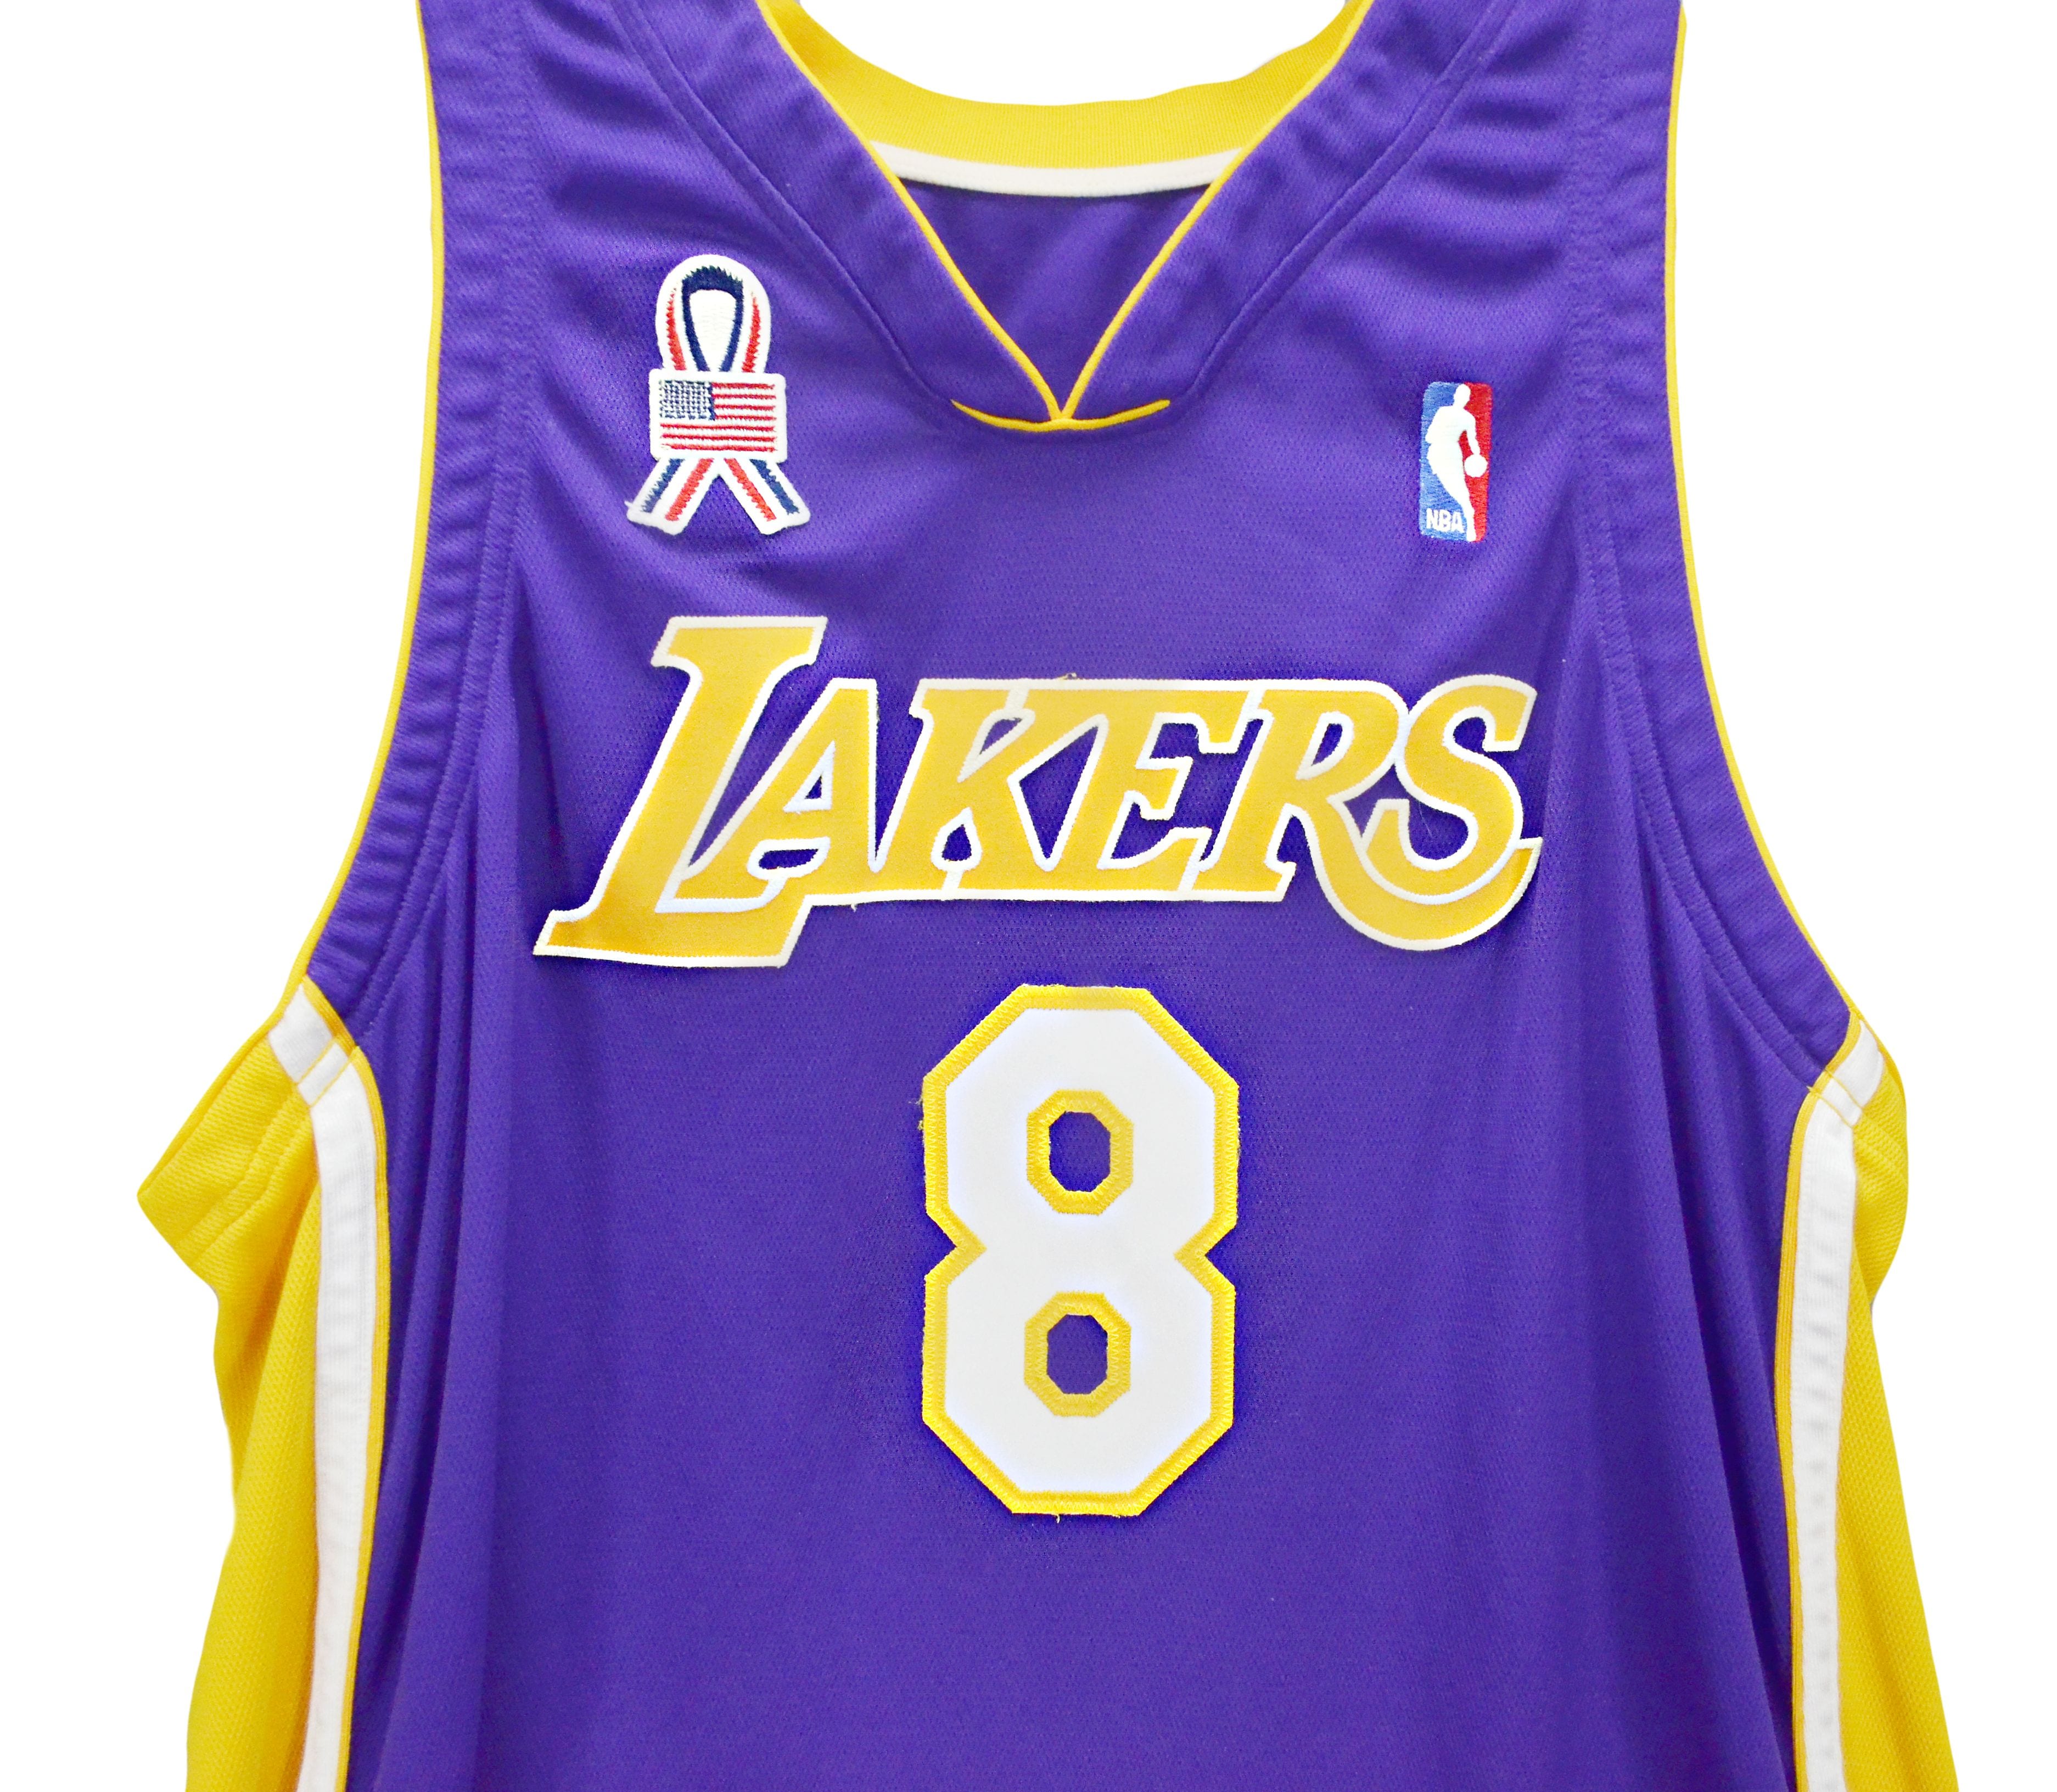 los angeles lakers jersey history